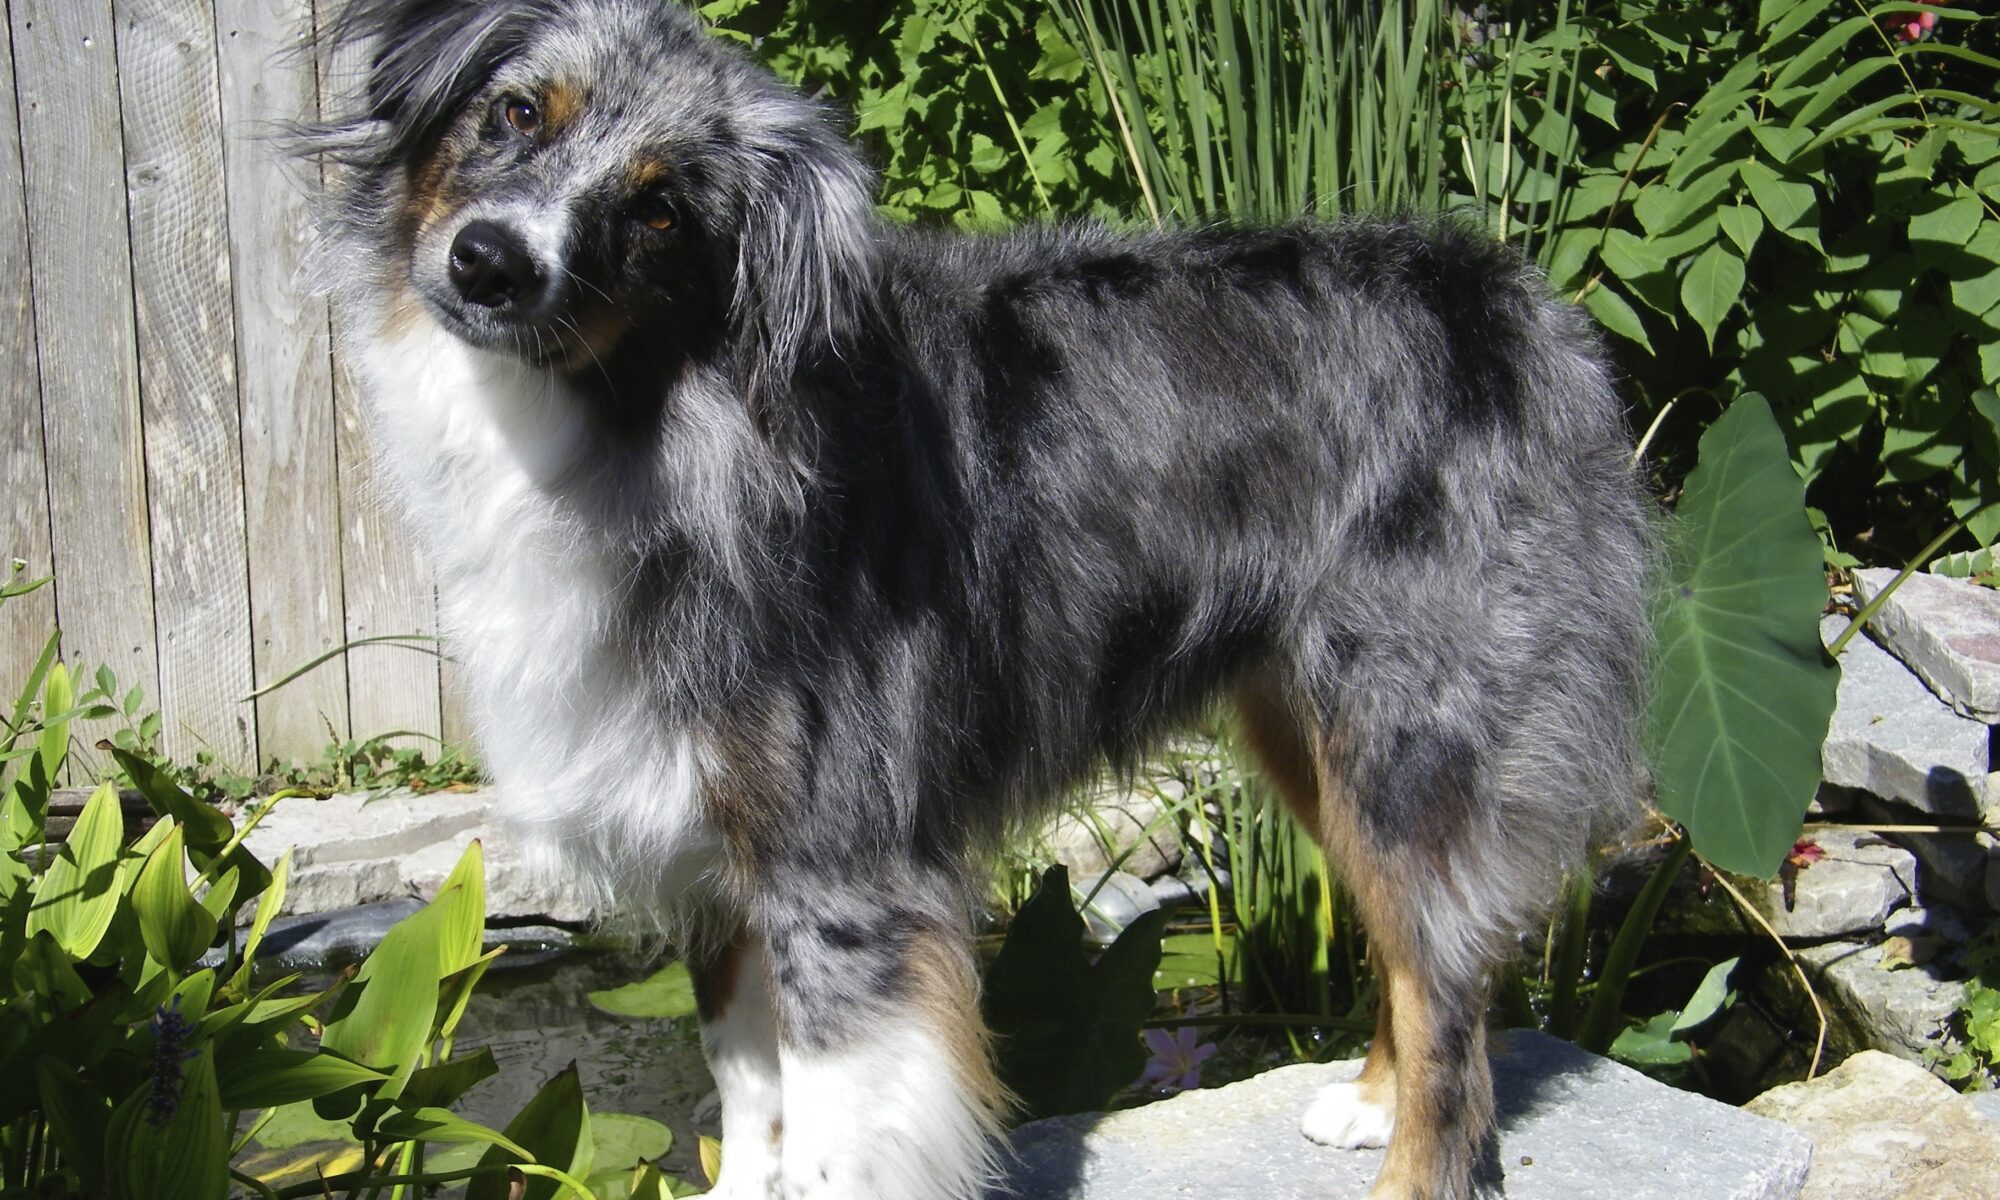 canine body language online course photo is of a blue merle Australian shepherd standing on a rock with a fence and greenery background